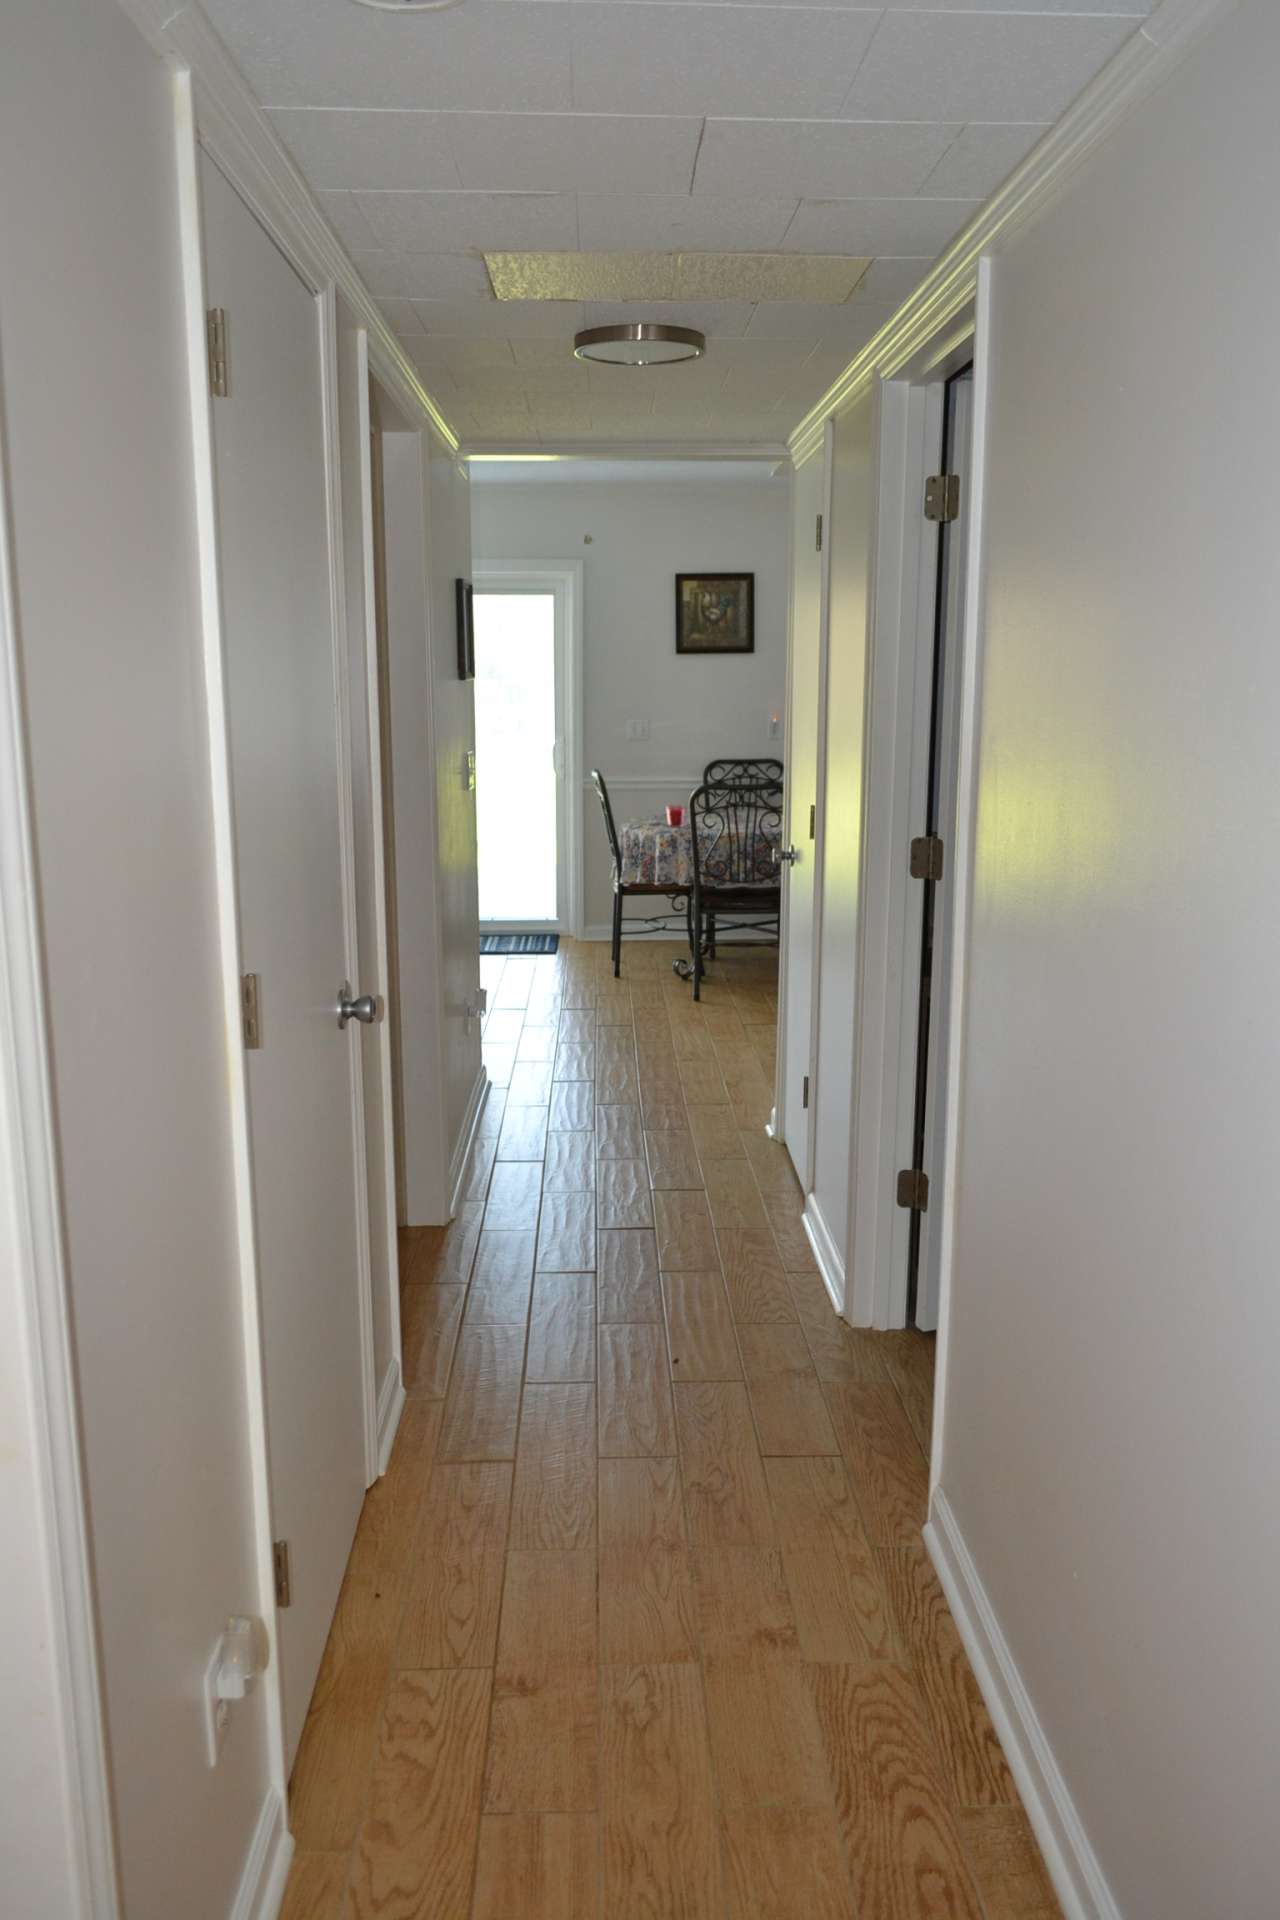 The lower level offers the option of a living space for extended family or rental income.